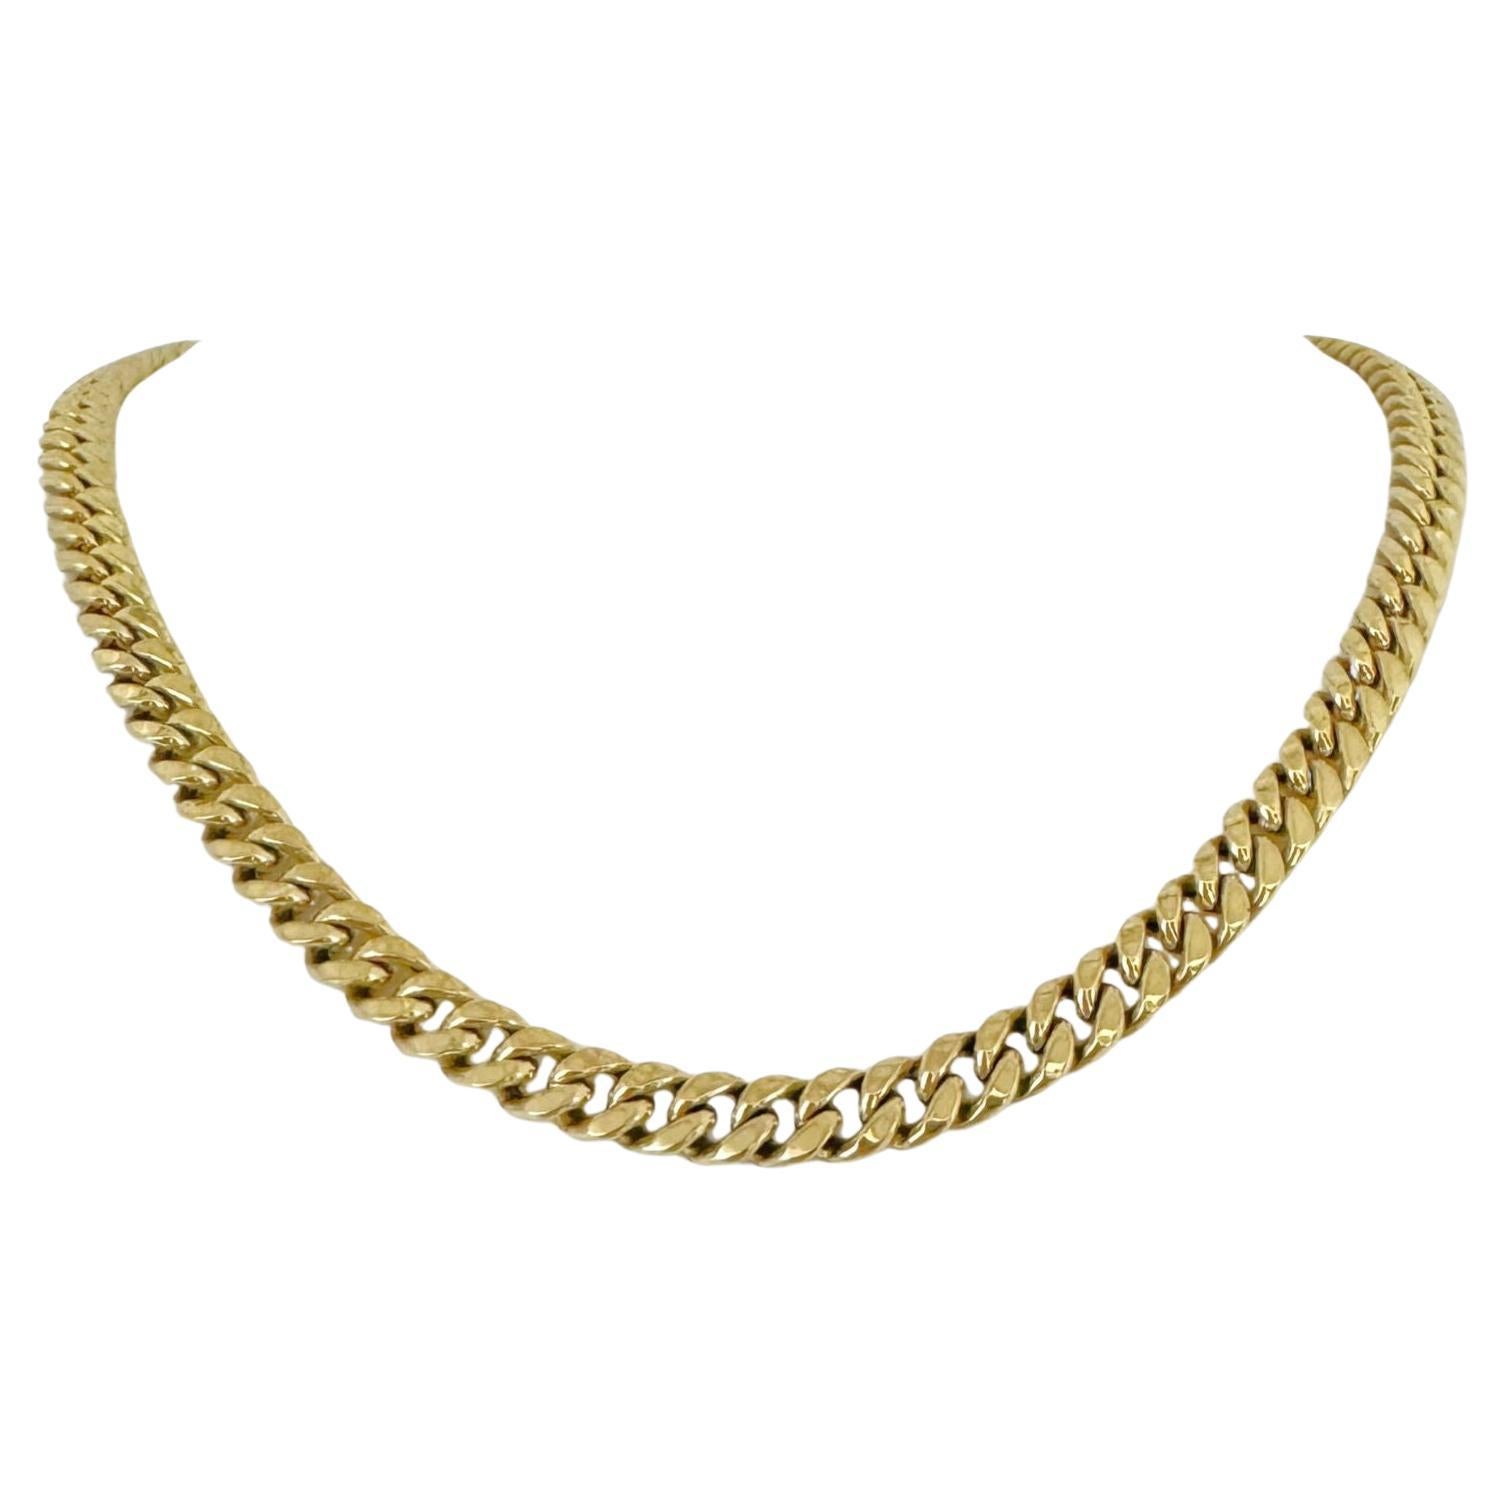 14 Karat Yellow Gold Hollow Polished Cuban Link Chain Necklace 